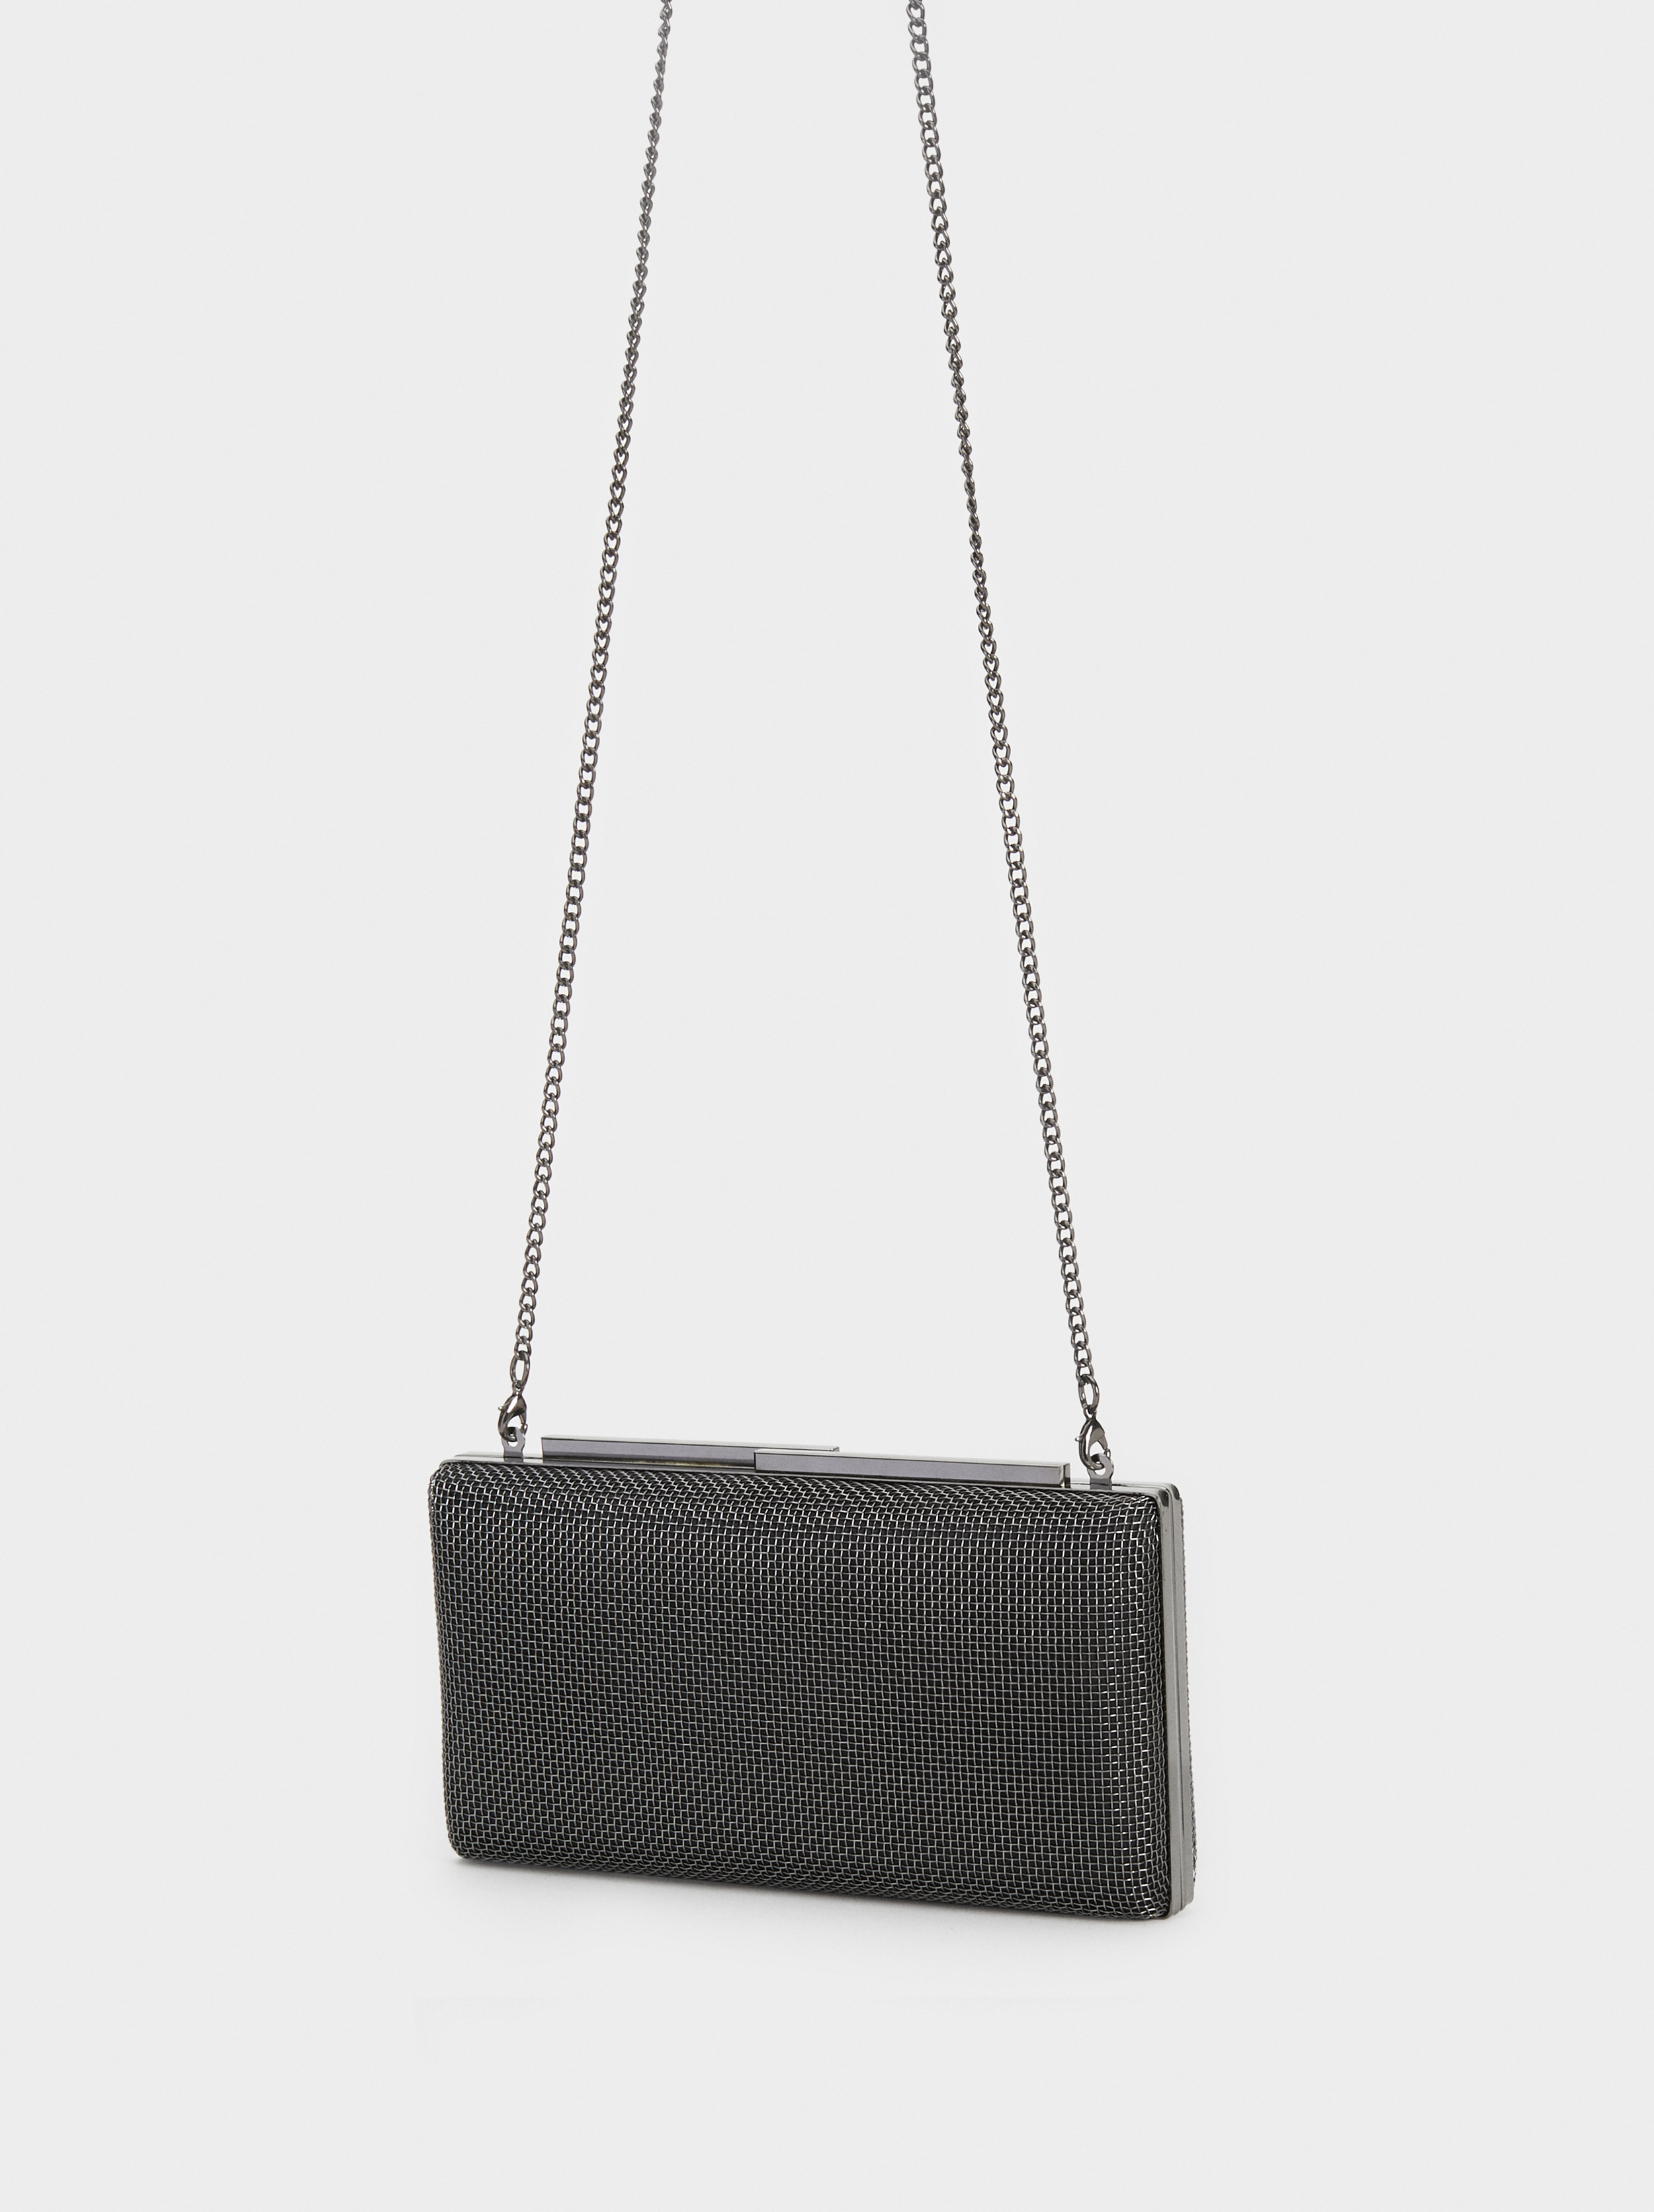 Metal Mesh Party Clutch image number 3.0